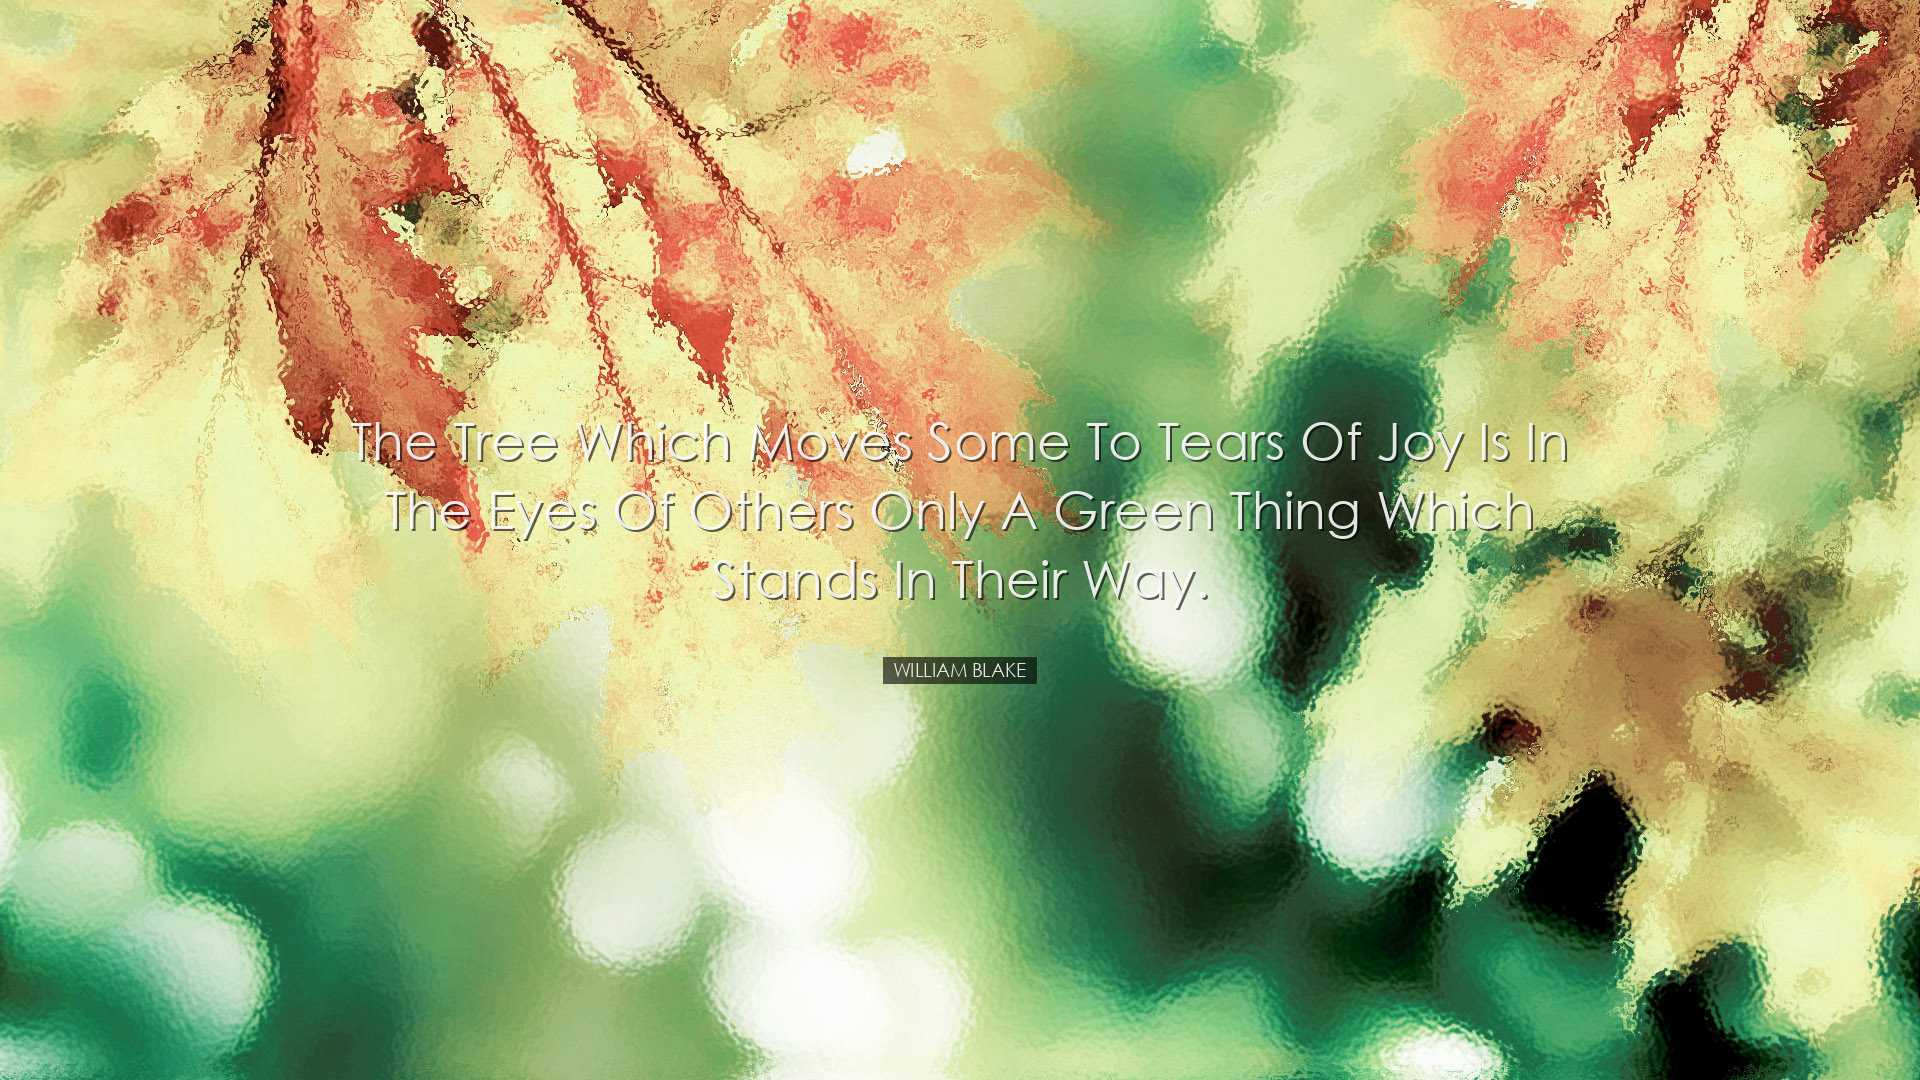 The tree which moves some to tears of joy is in the eyes of others